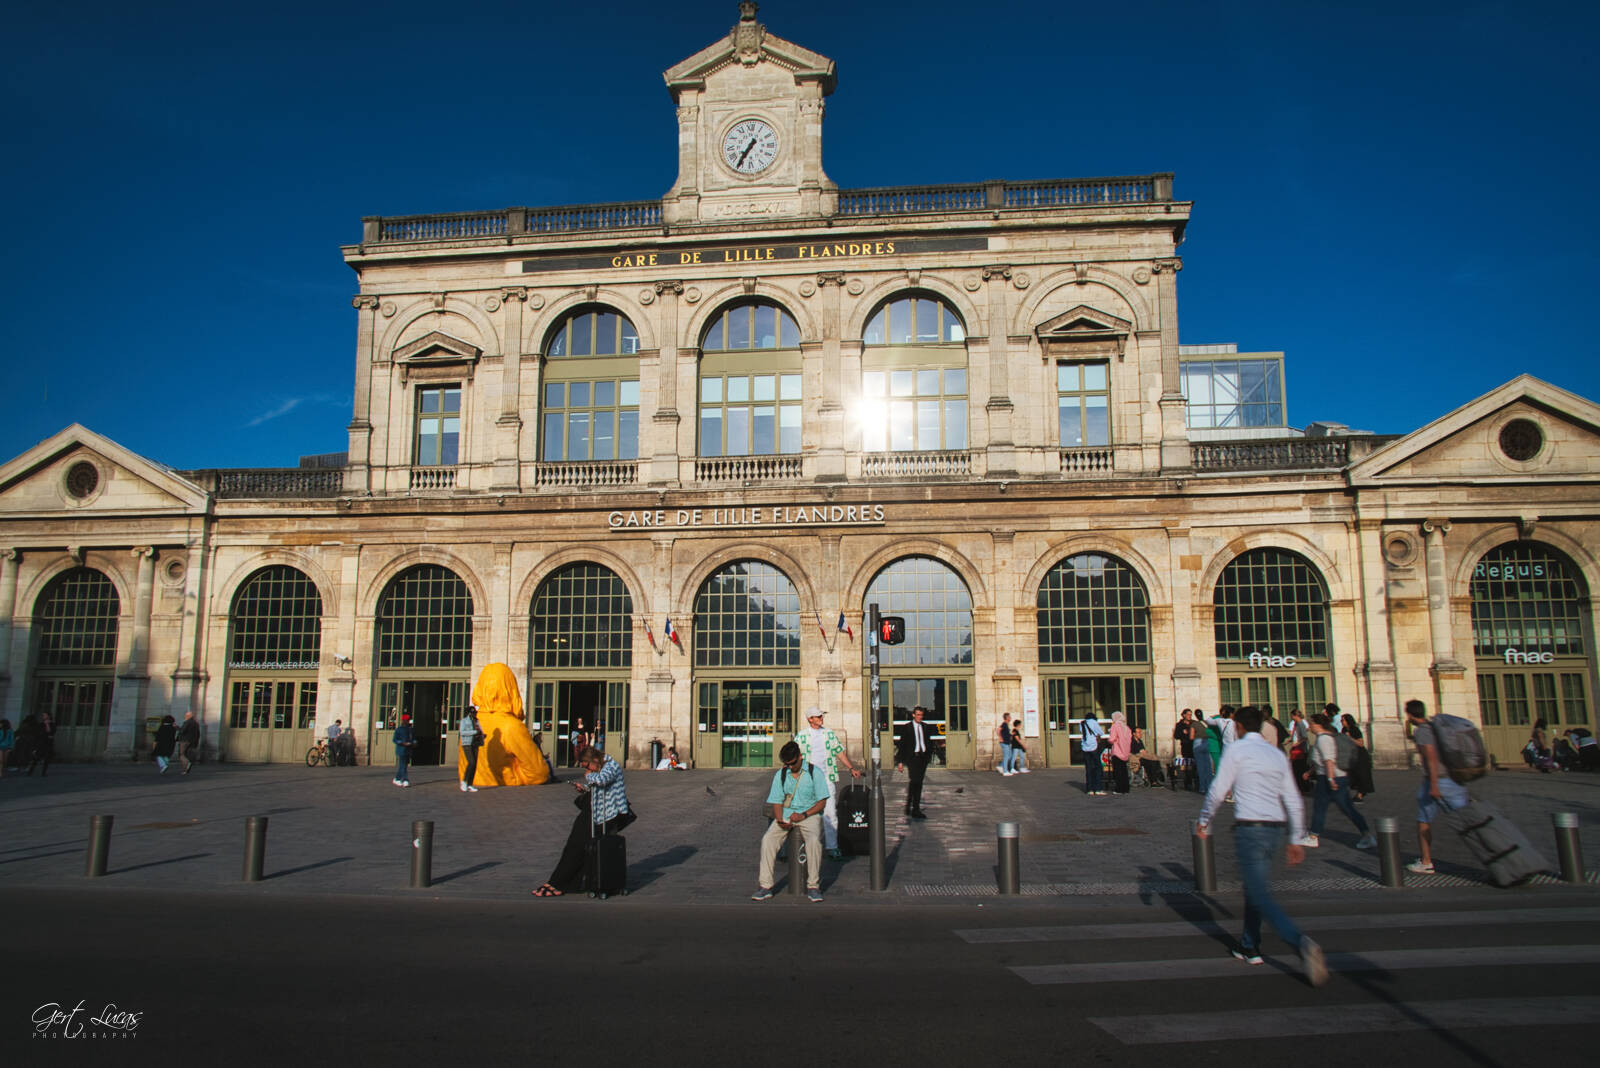 Image of Lille Flandres railwaystation by Gert Lucas